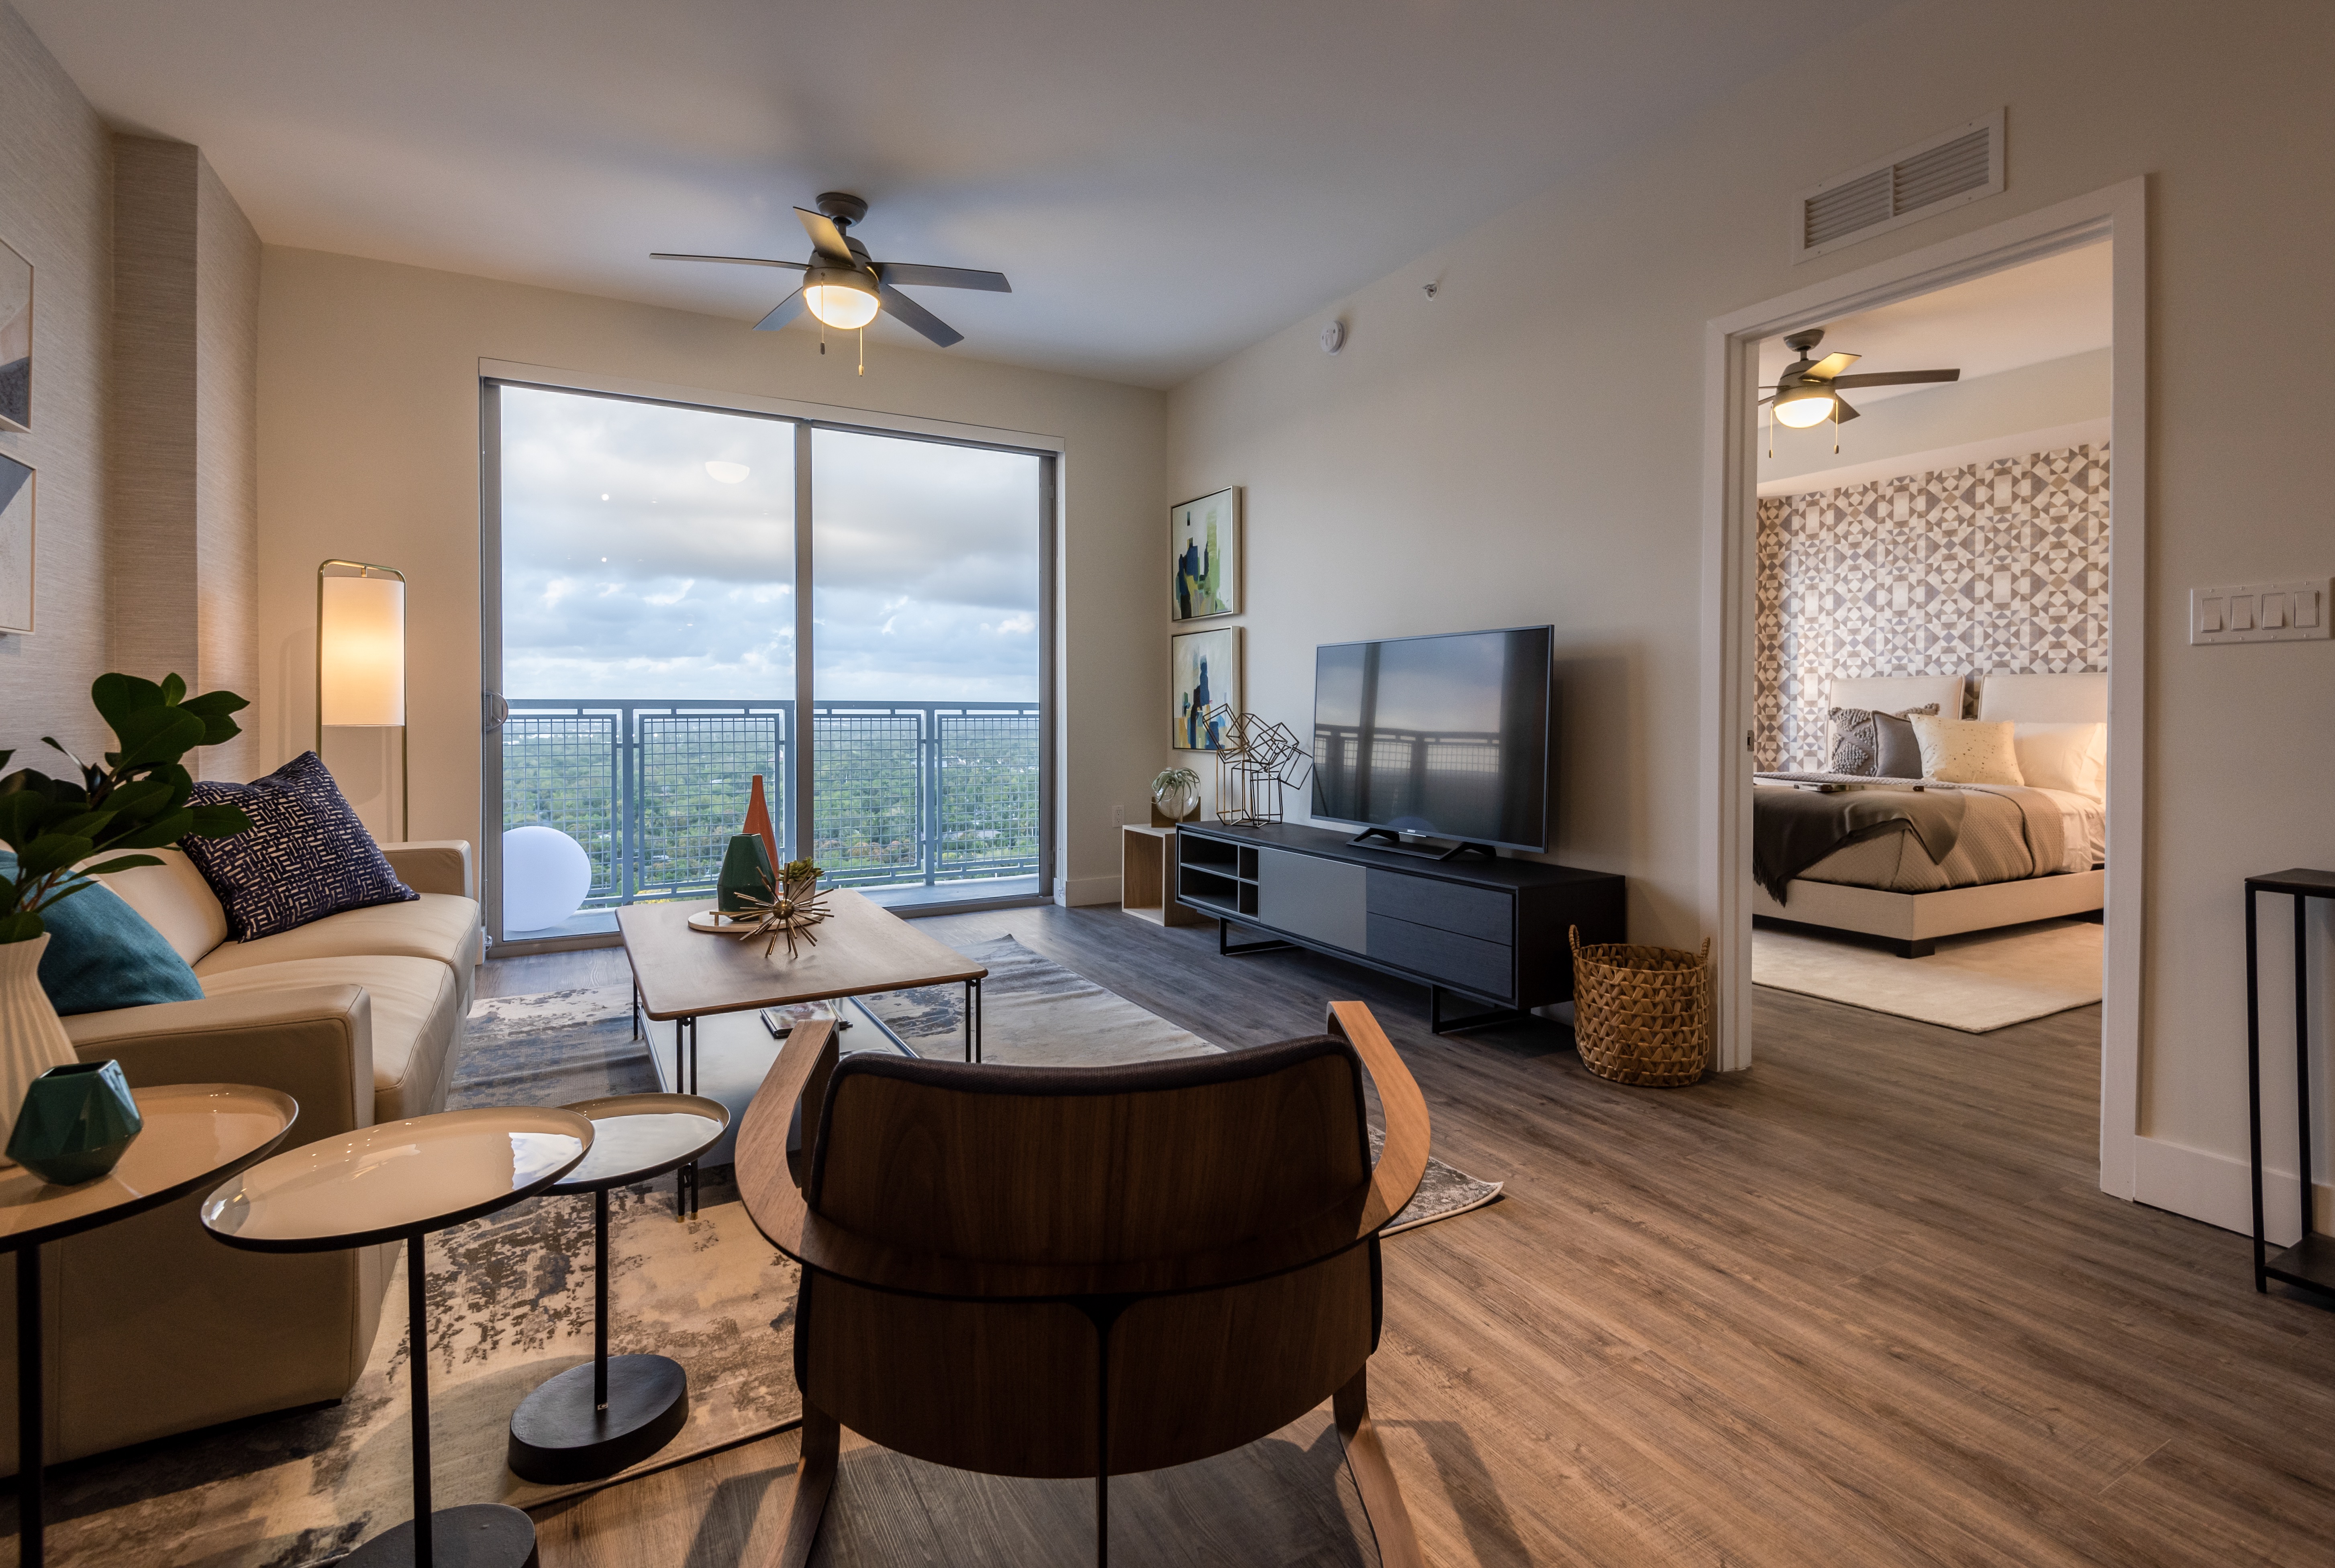 Apartment living room with hardwood floors, balcony view and bedroom